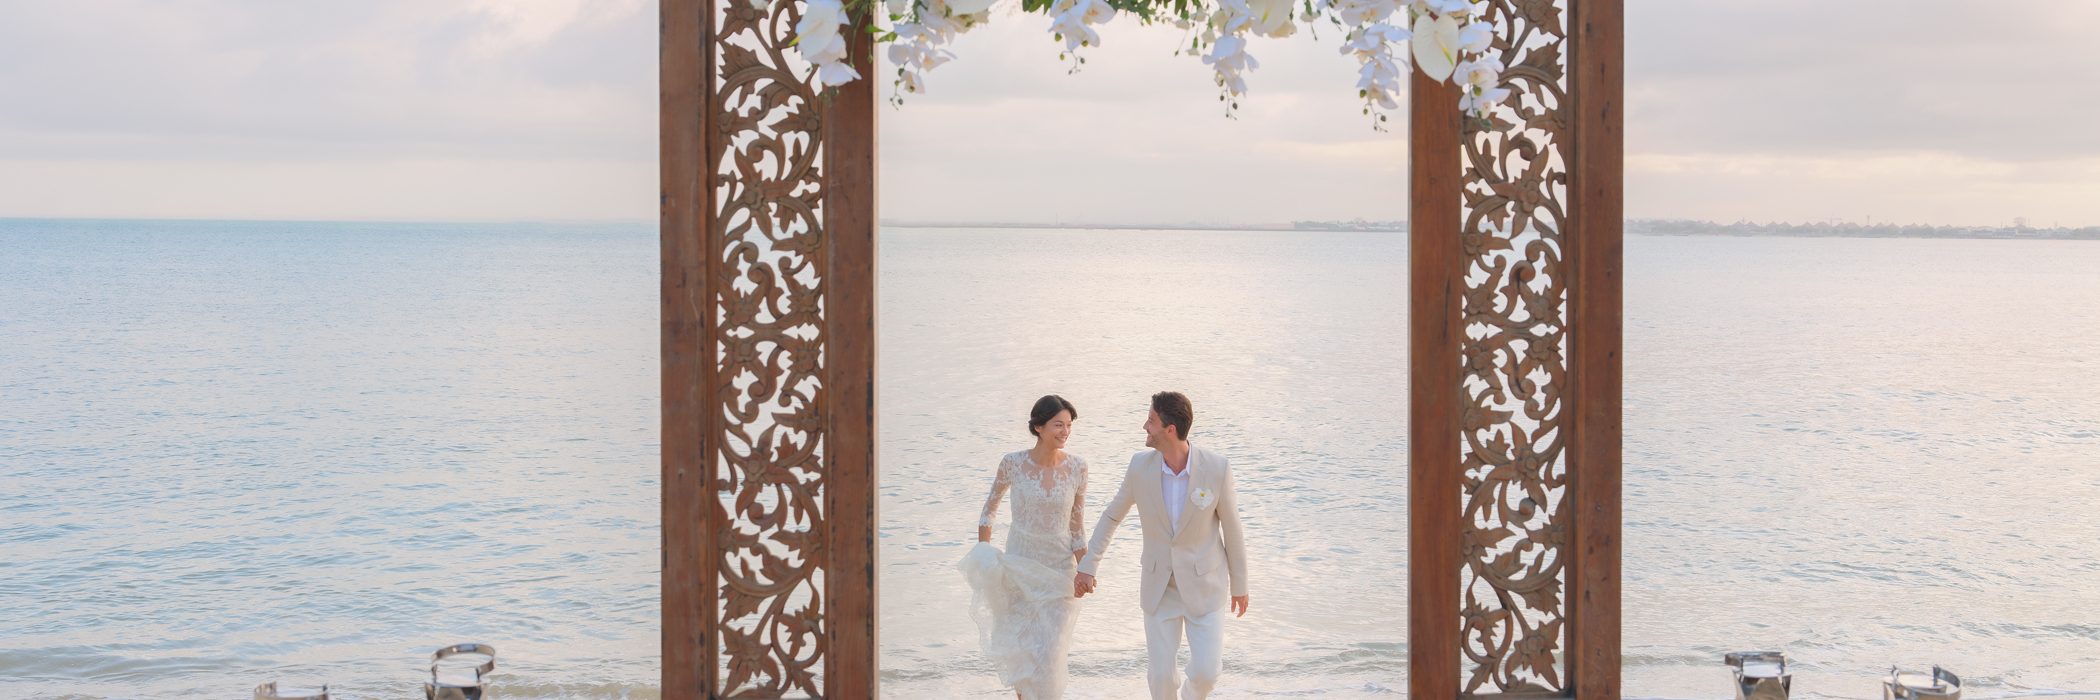 Raffles Bali - These are the 14 Best Wedding Venues to Book in Bali by Brides.com